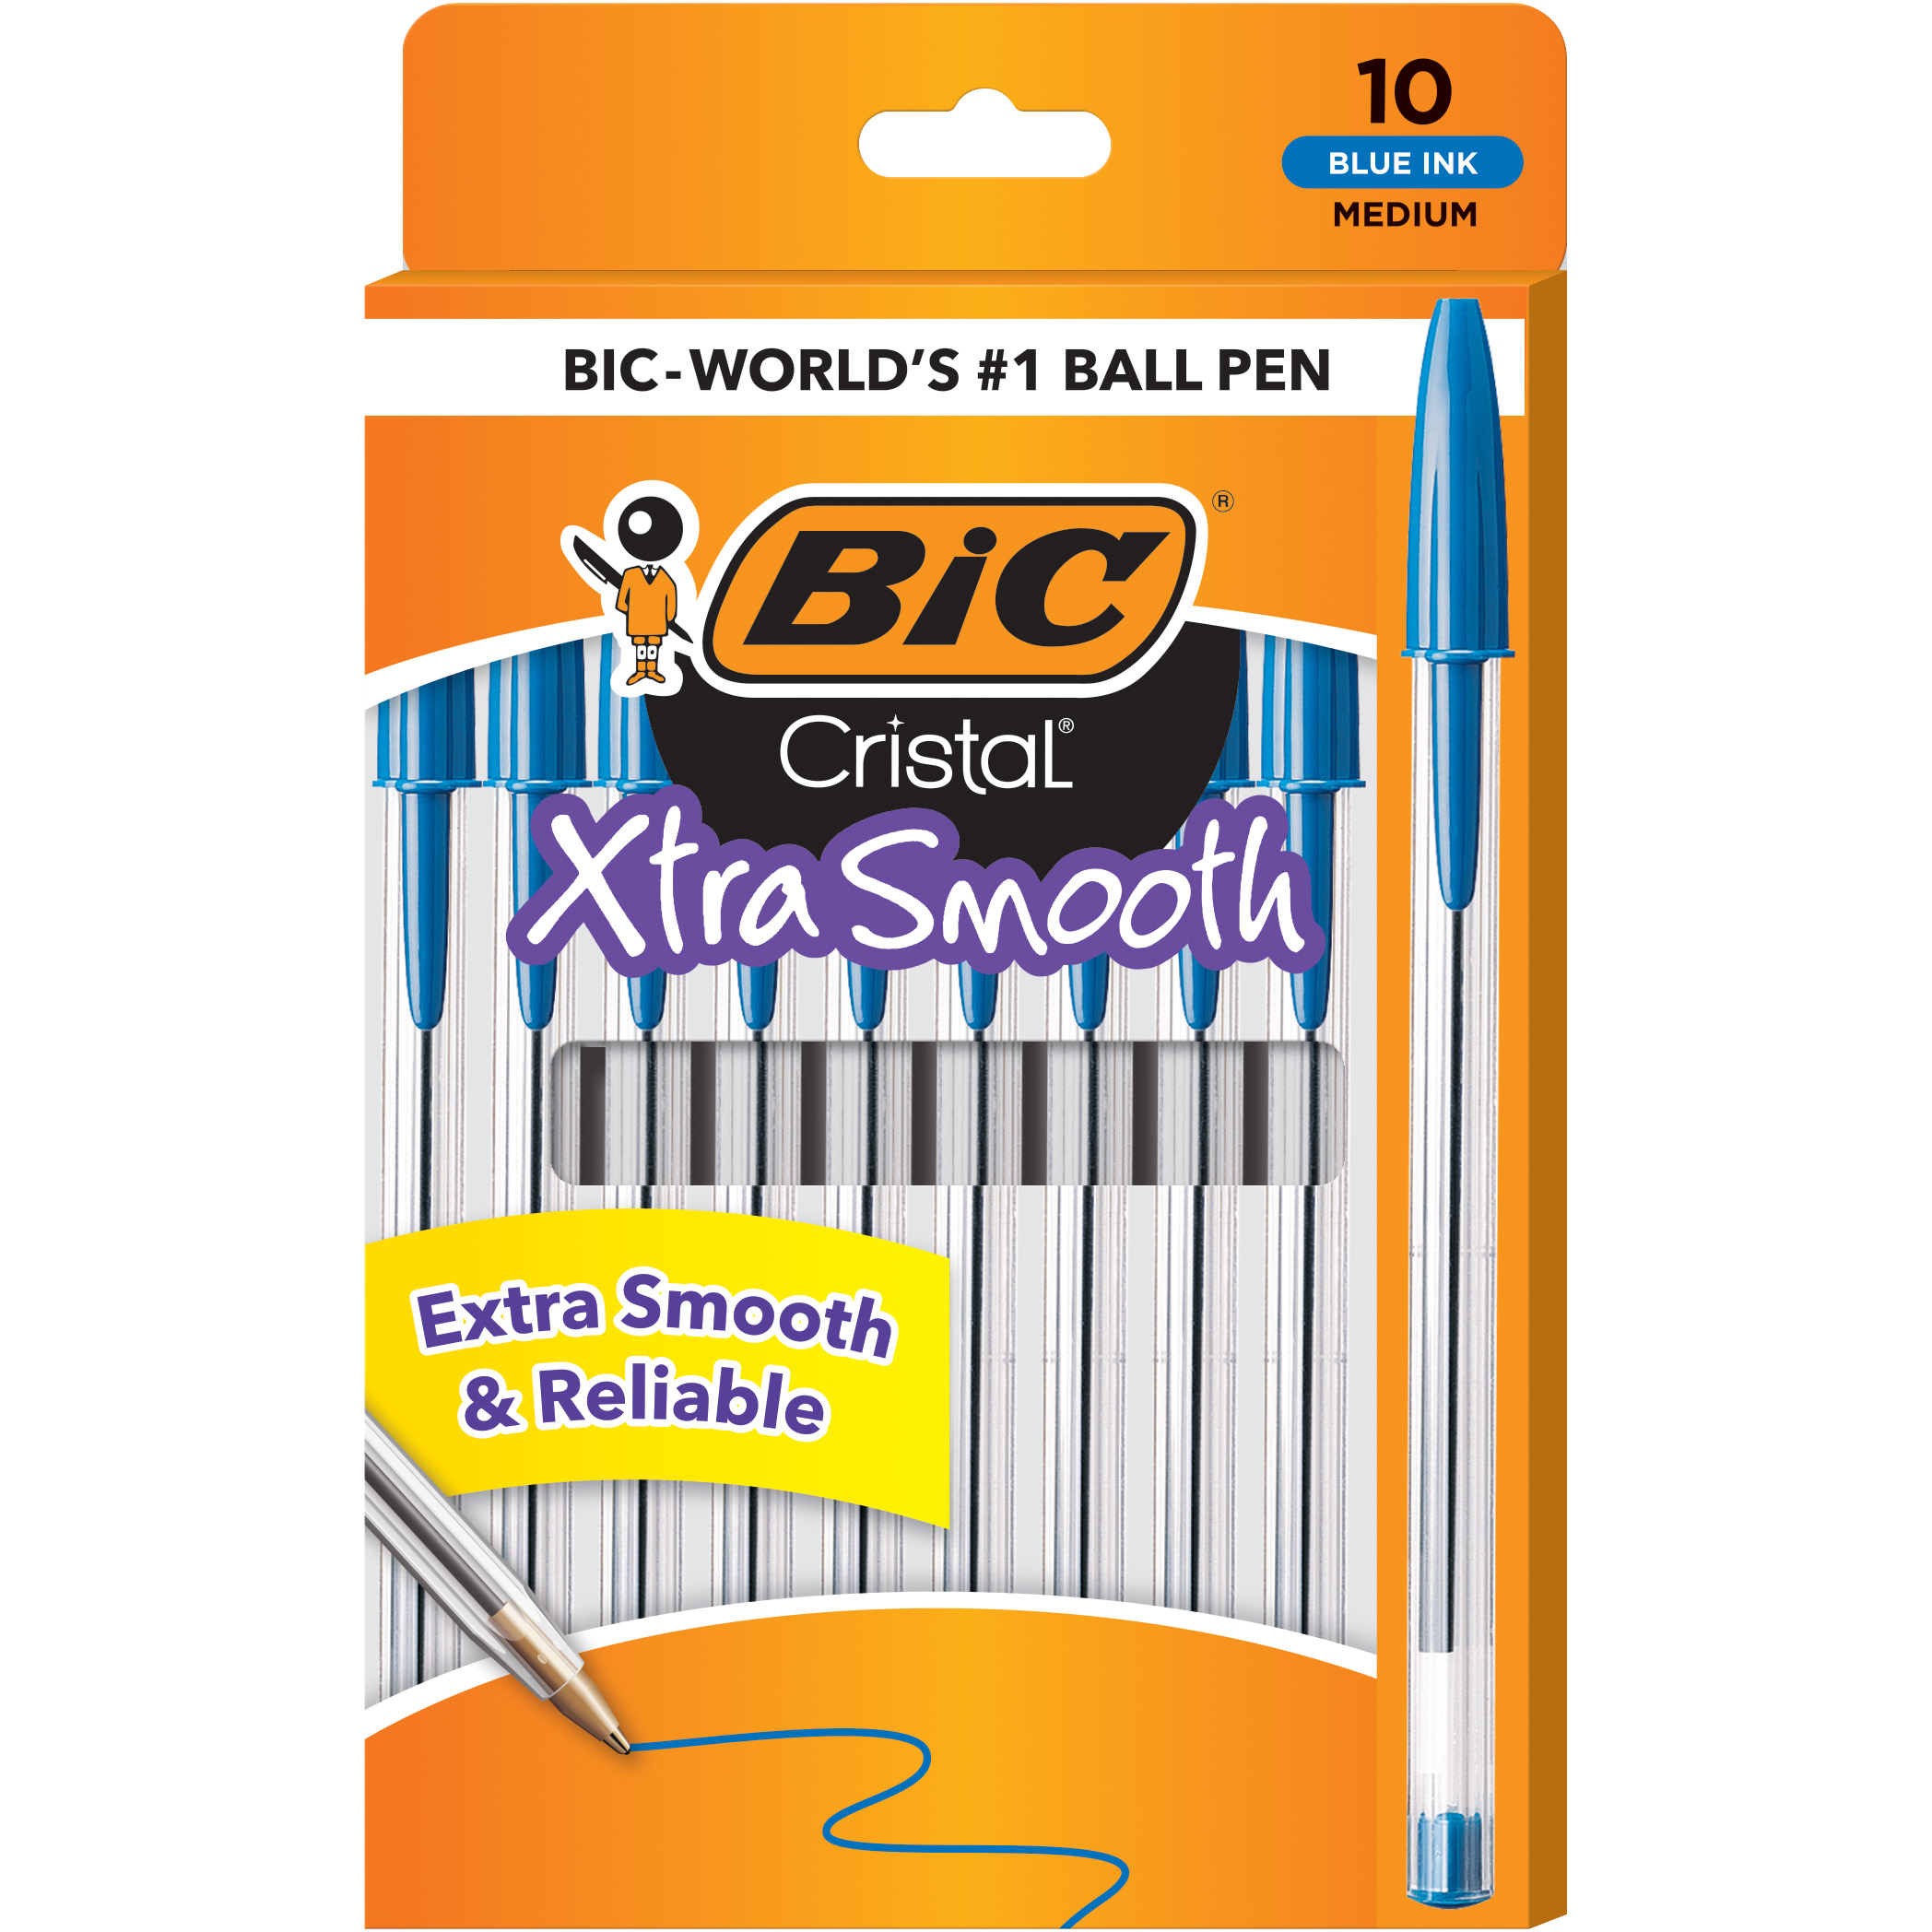 BIC Cristal Xtra Smooth Stic Ball Pens, 1.0 mm, Blue Ink, Pack of 10 - image 1 of 10